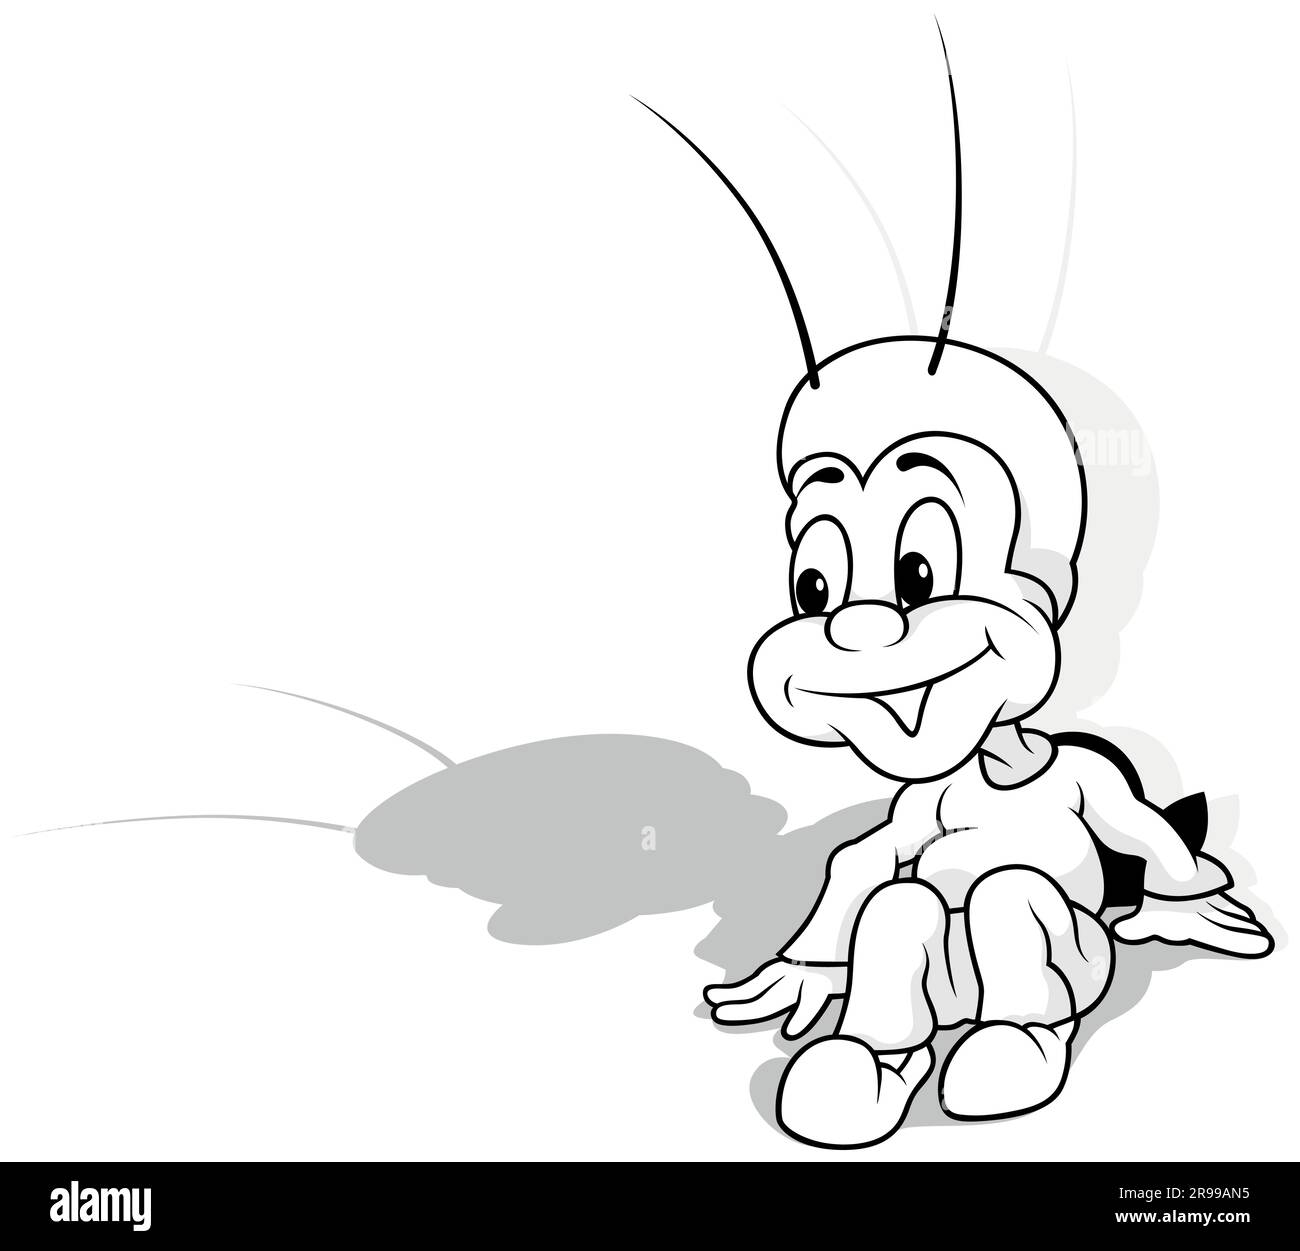 Drawing of a Sitting Cricket on the Ground Stock Vector